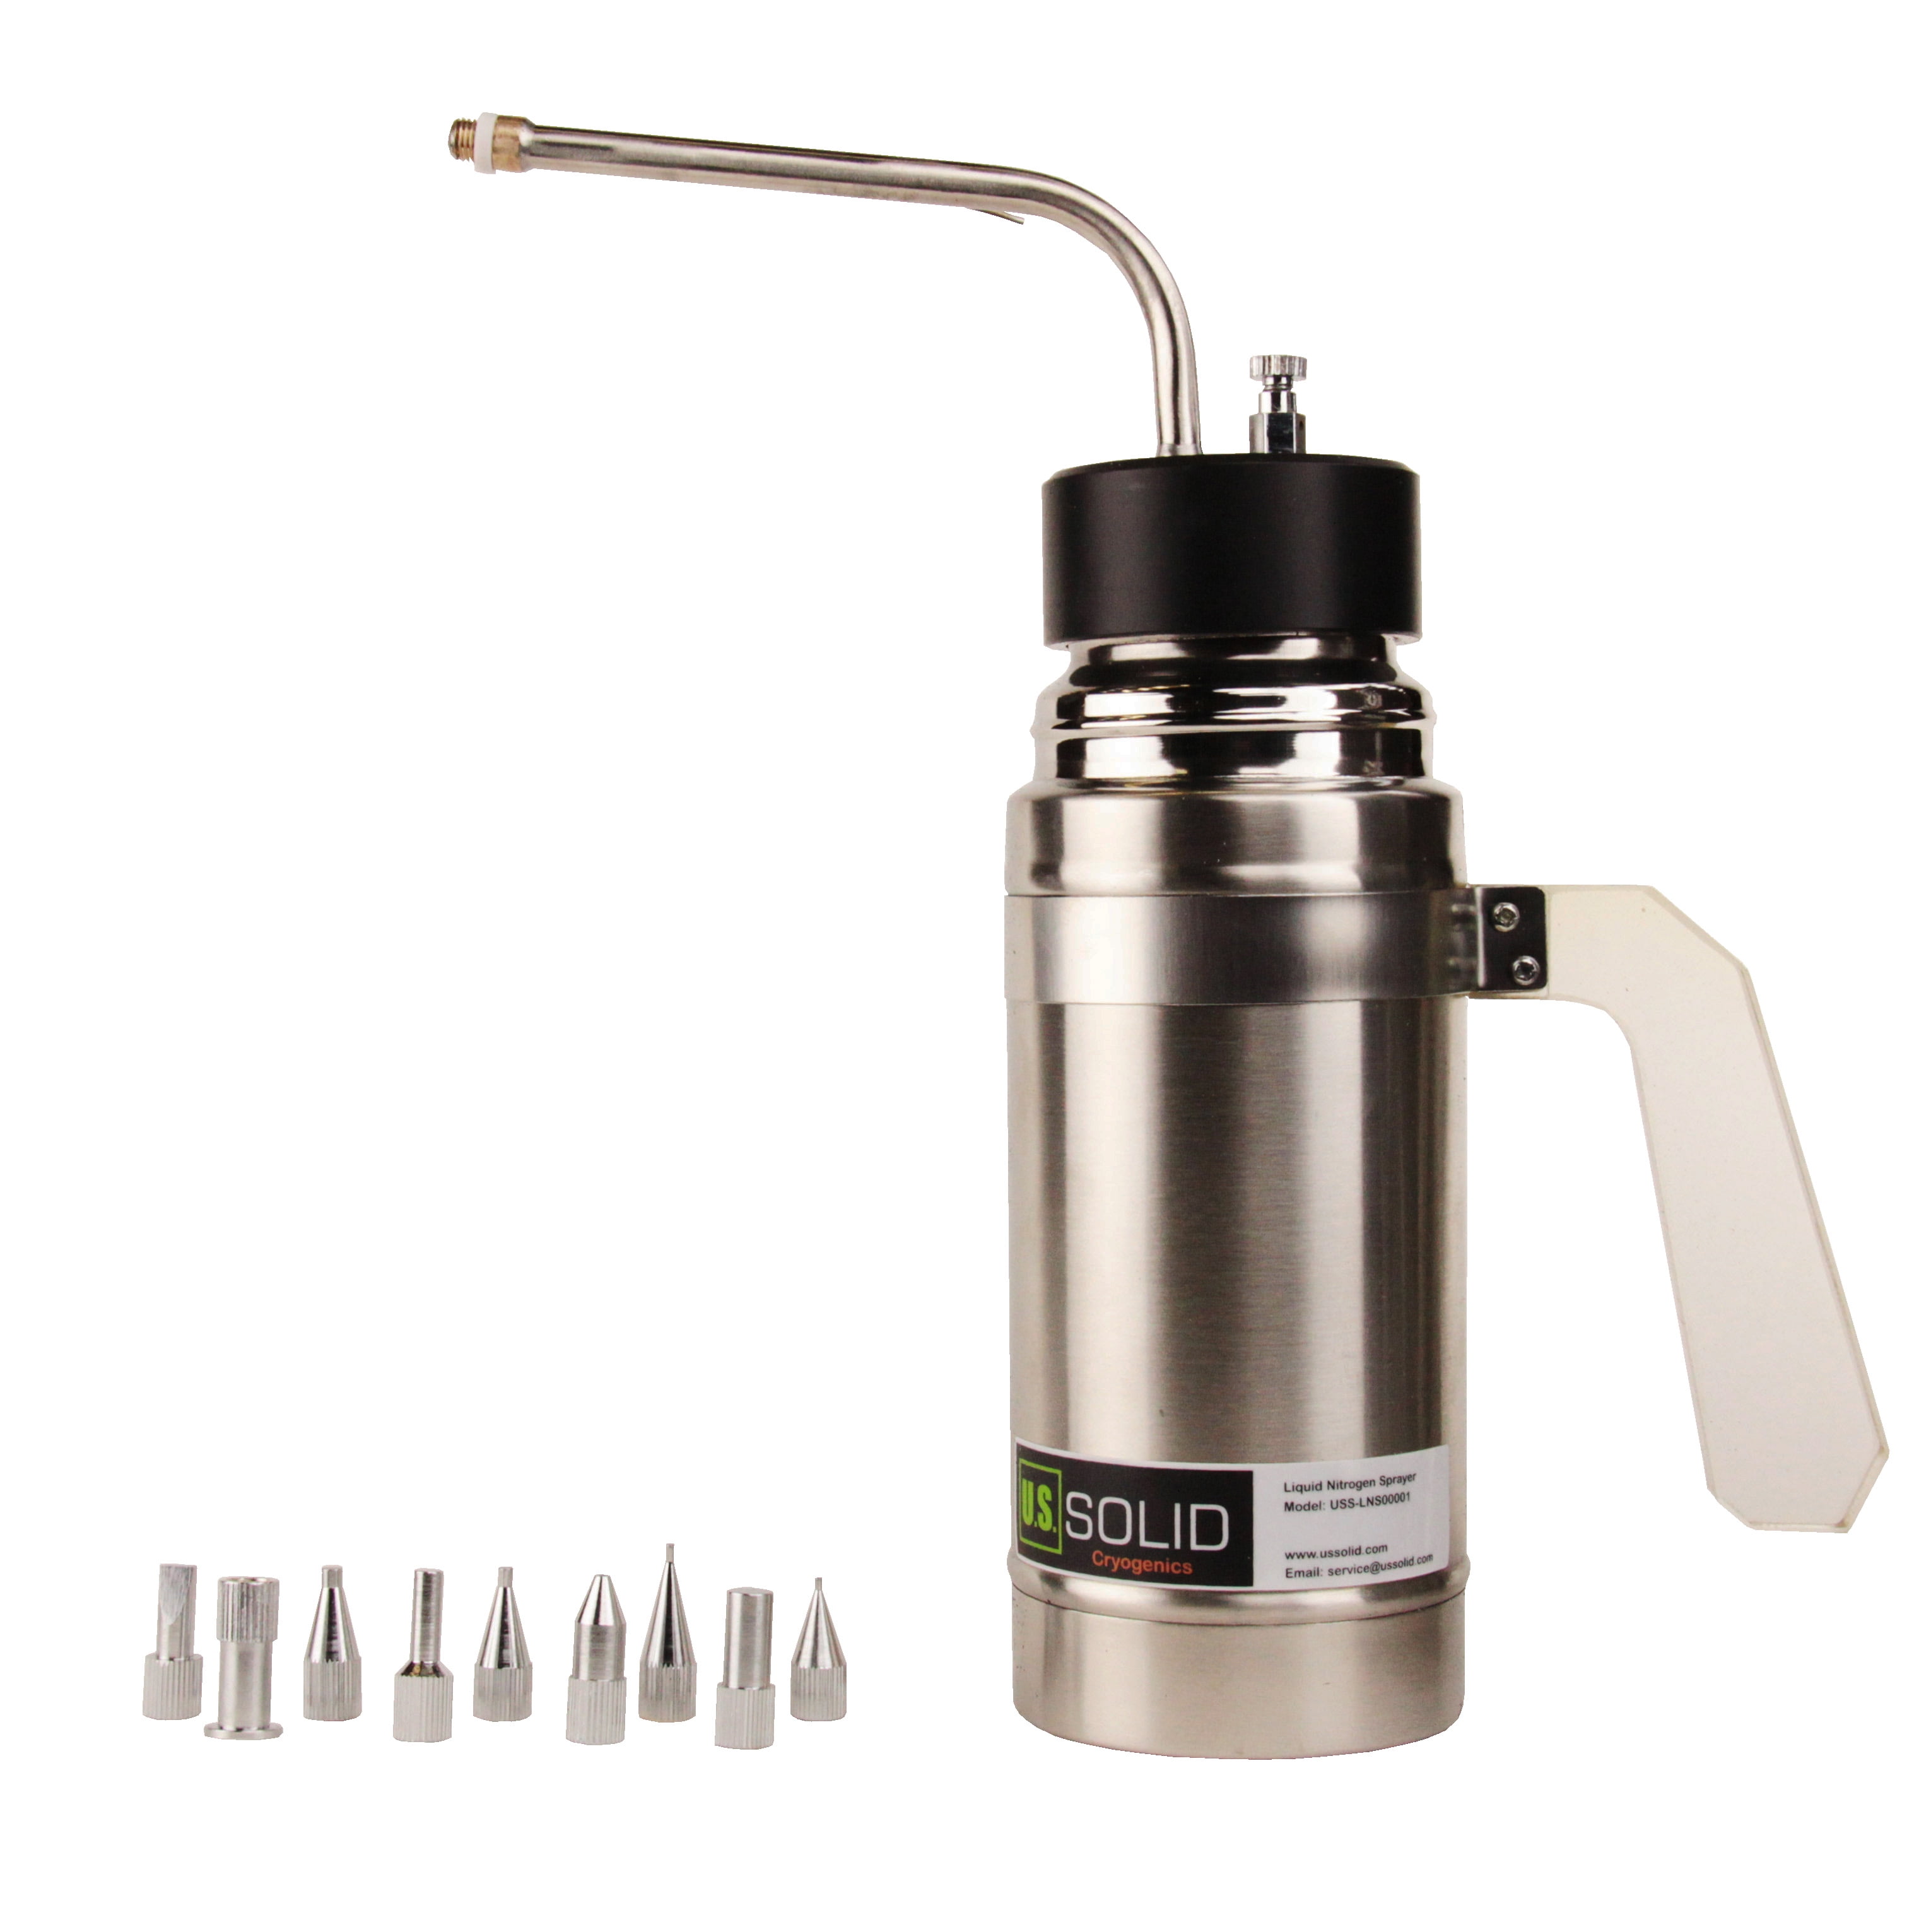 INPANOLS 3L Liquid Nitrogen Dewar, Cryogenic Nitrogen Container Tank with 3  Canisters & Carry Bag